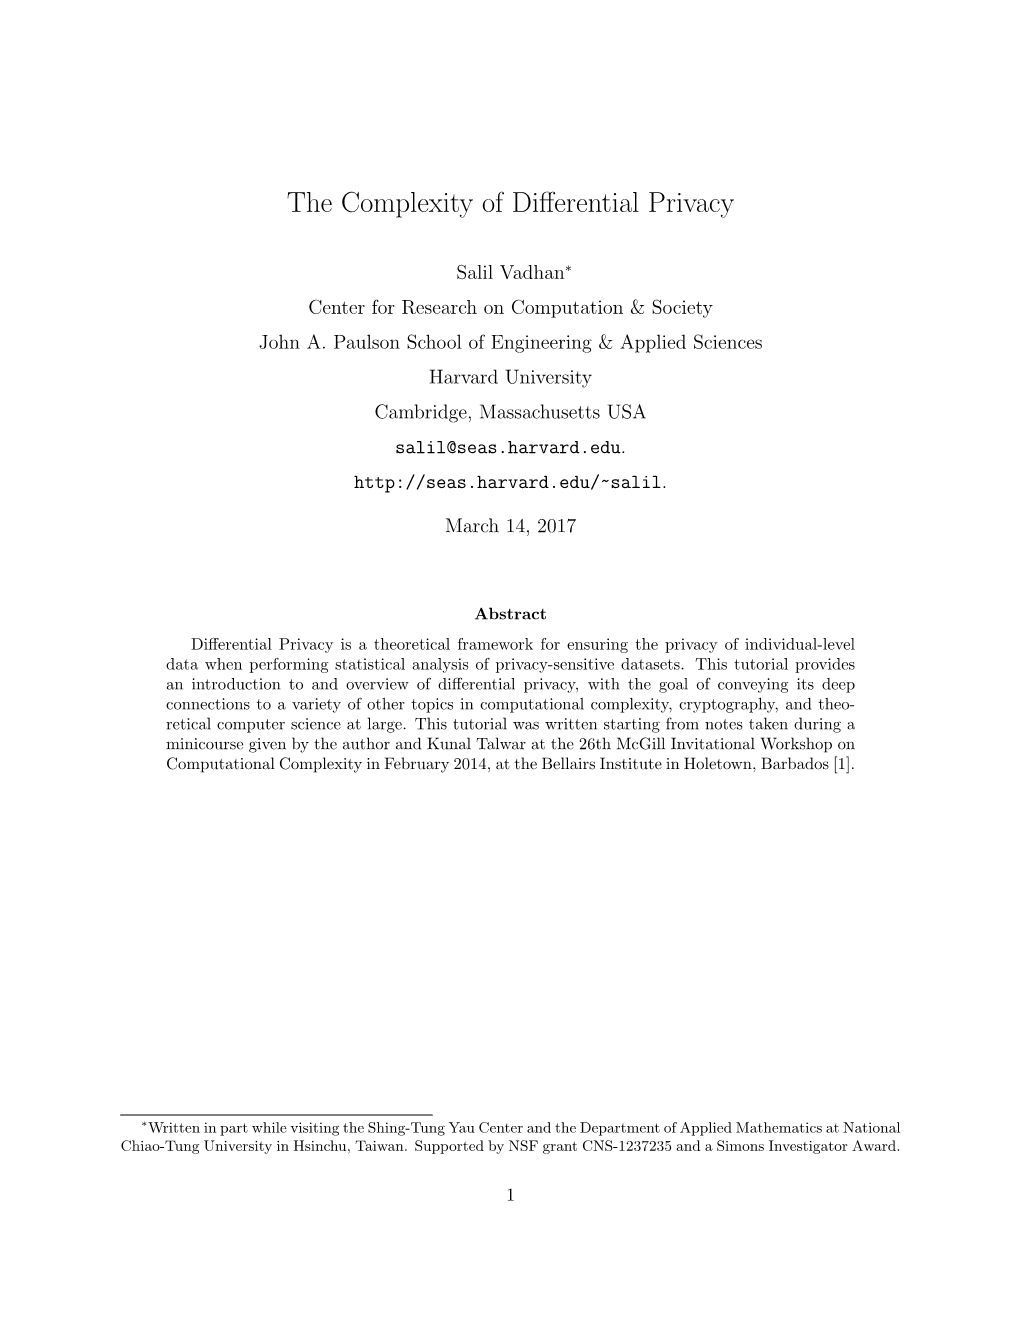 The Complexity of Differential Privacy